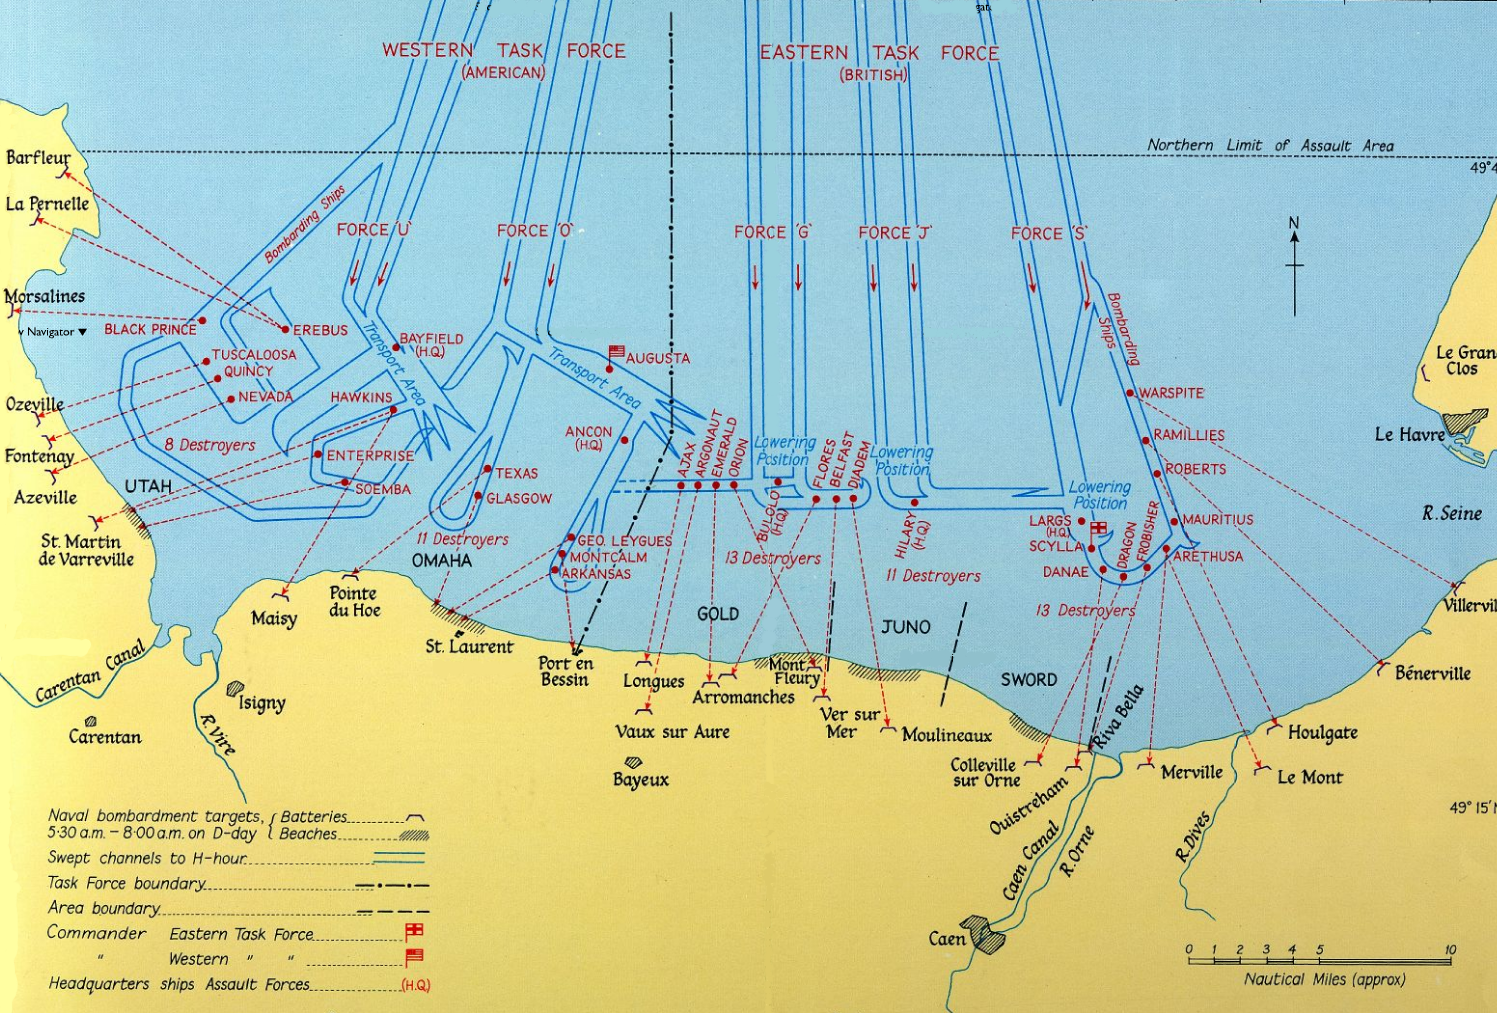 message-editor%2F1614984112310-naval_bombardments_on_d-day.png